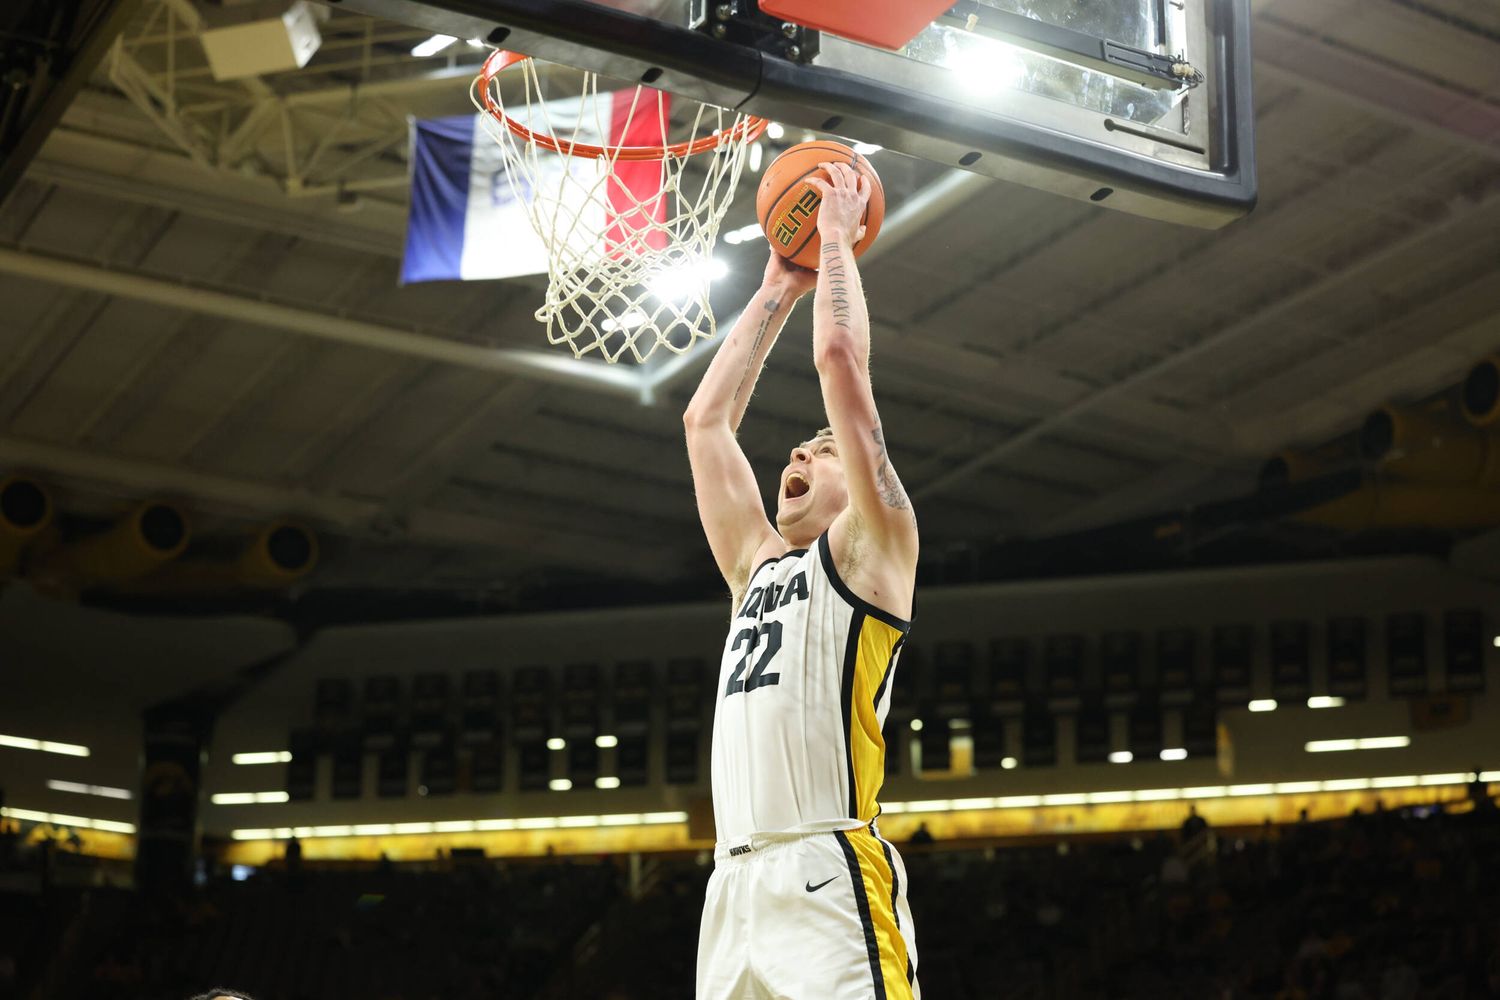 Iowa men's basketball scrapes by Arkansas State, 88-74, in game